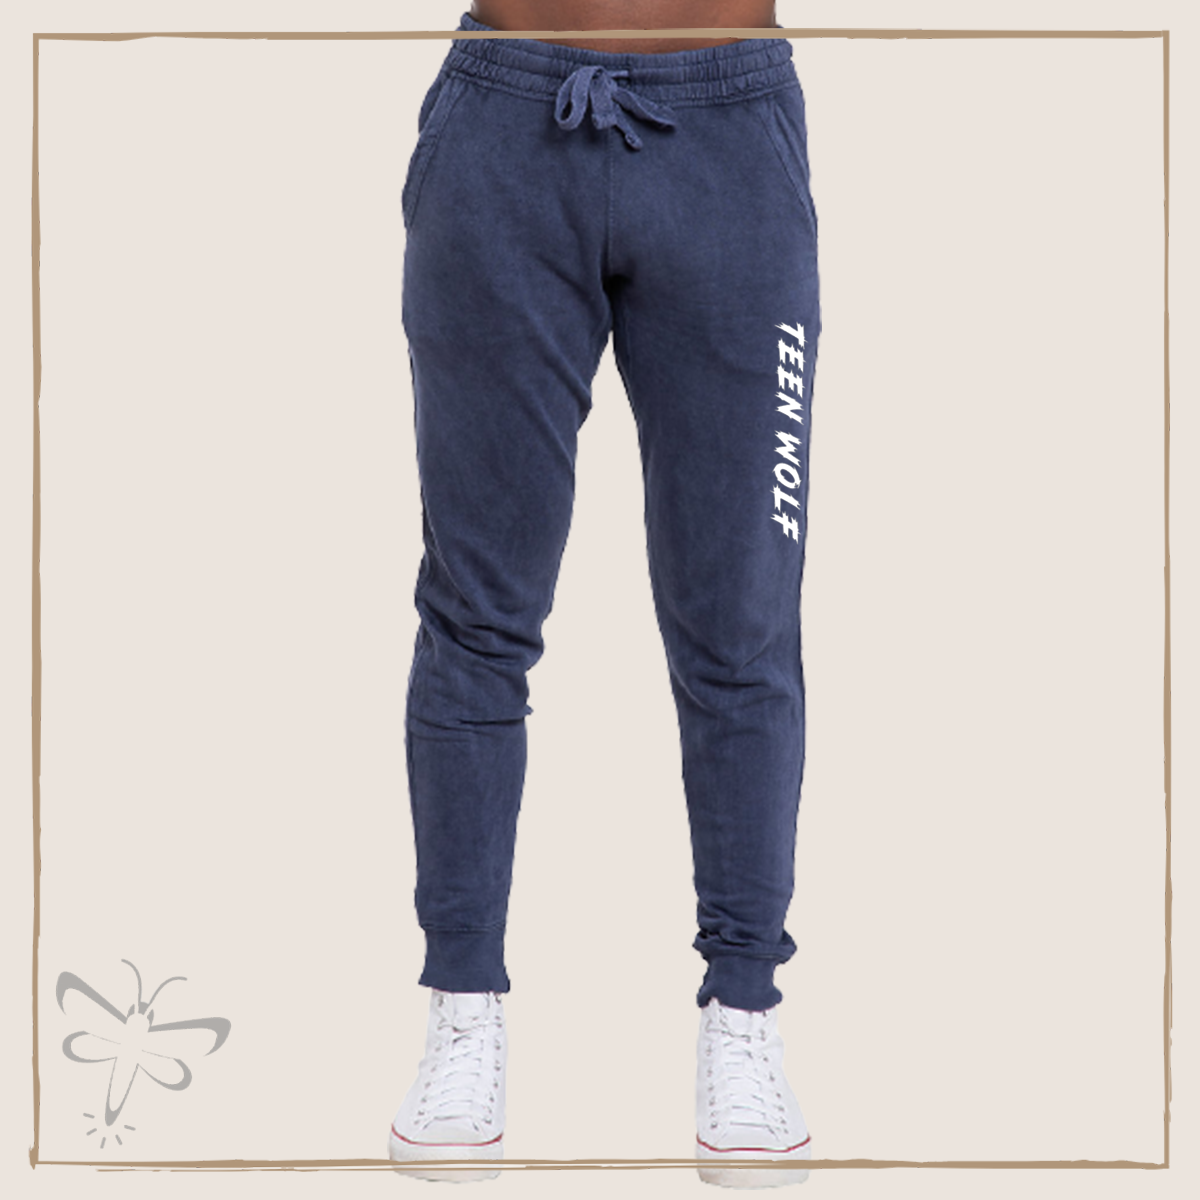 Teen Wolf Vintage Joggers (Unisex) Xs / Denim With White Text Jogger